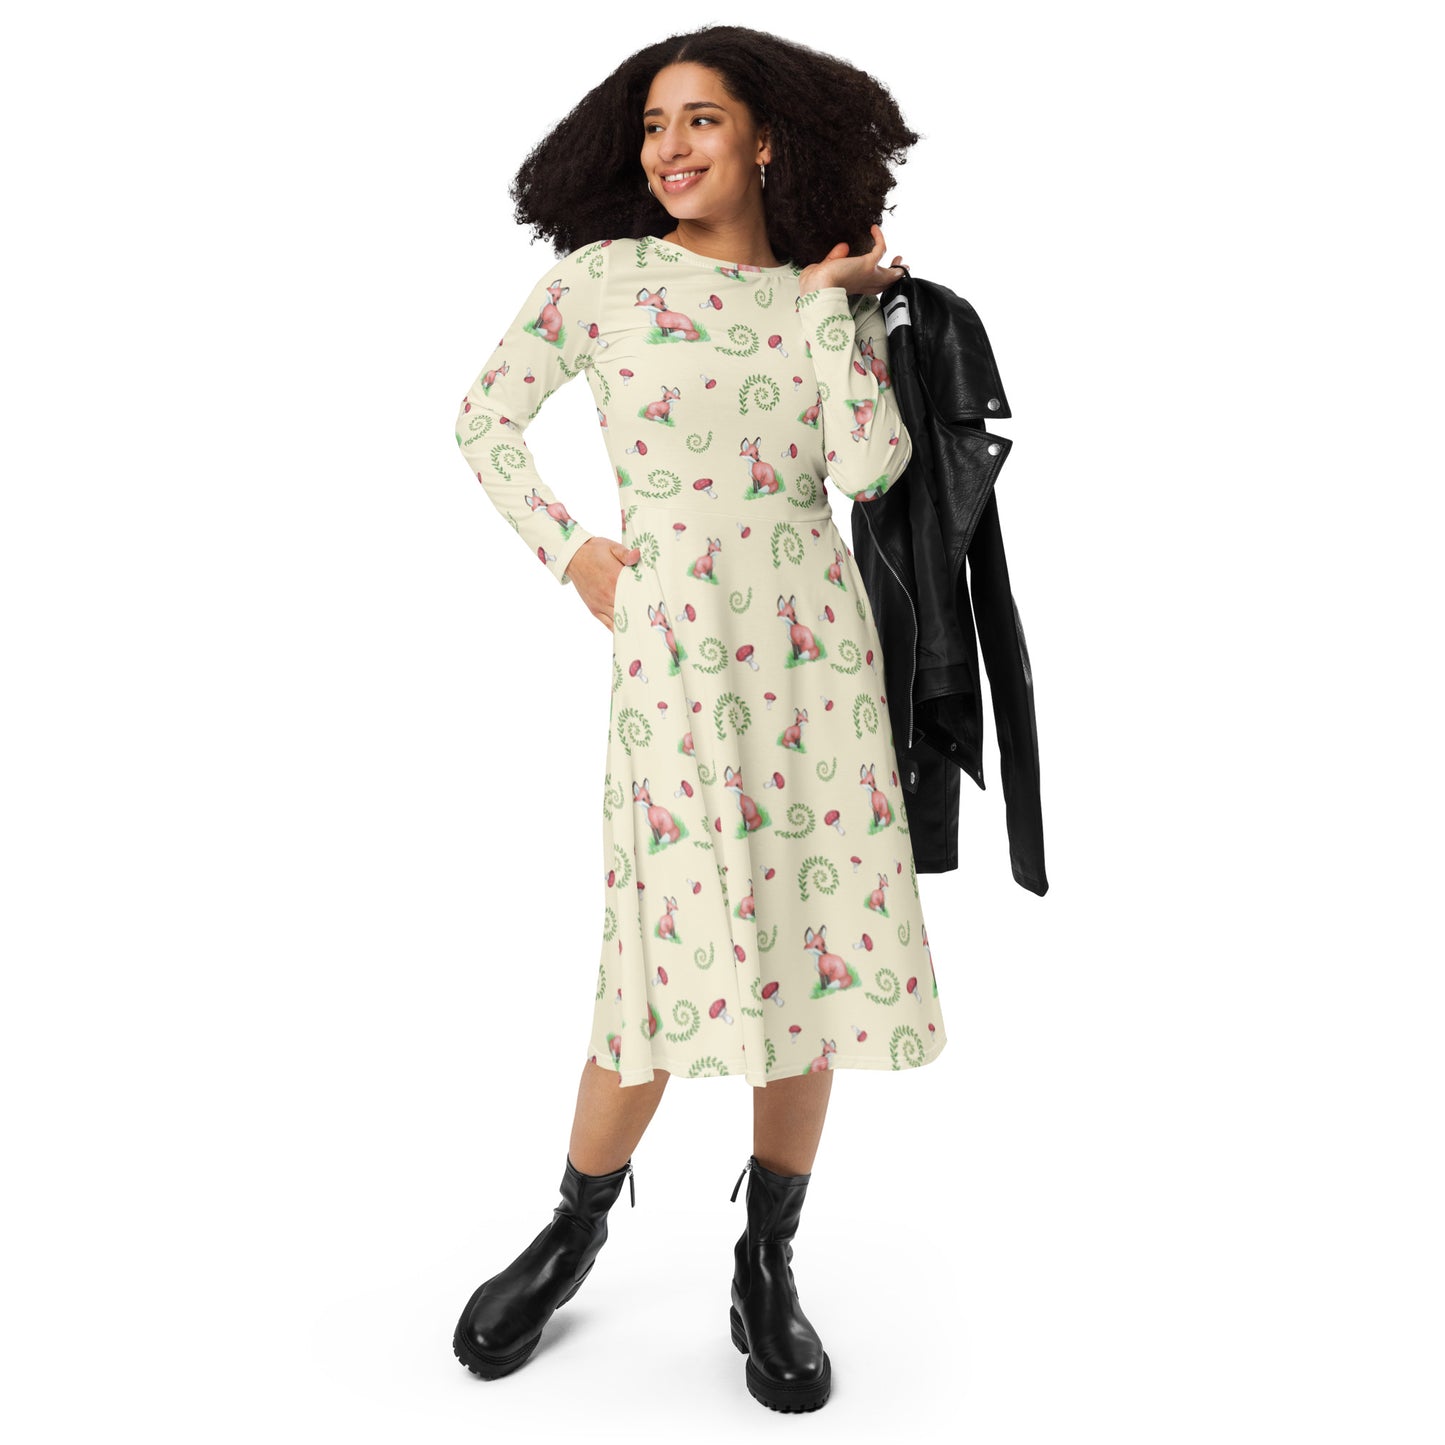 Fox pattern long sleeve midi dress with side pockets, fitted waist, and flared bottom. Foxes, ferns, and mushrooms are patterned on the apricot white fabric. Soft and comfortable. Shown on model with black jacket over her shoulder.